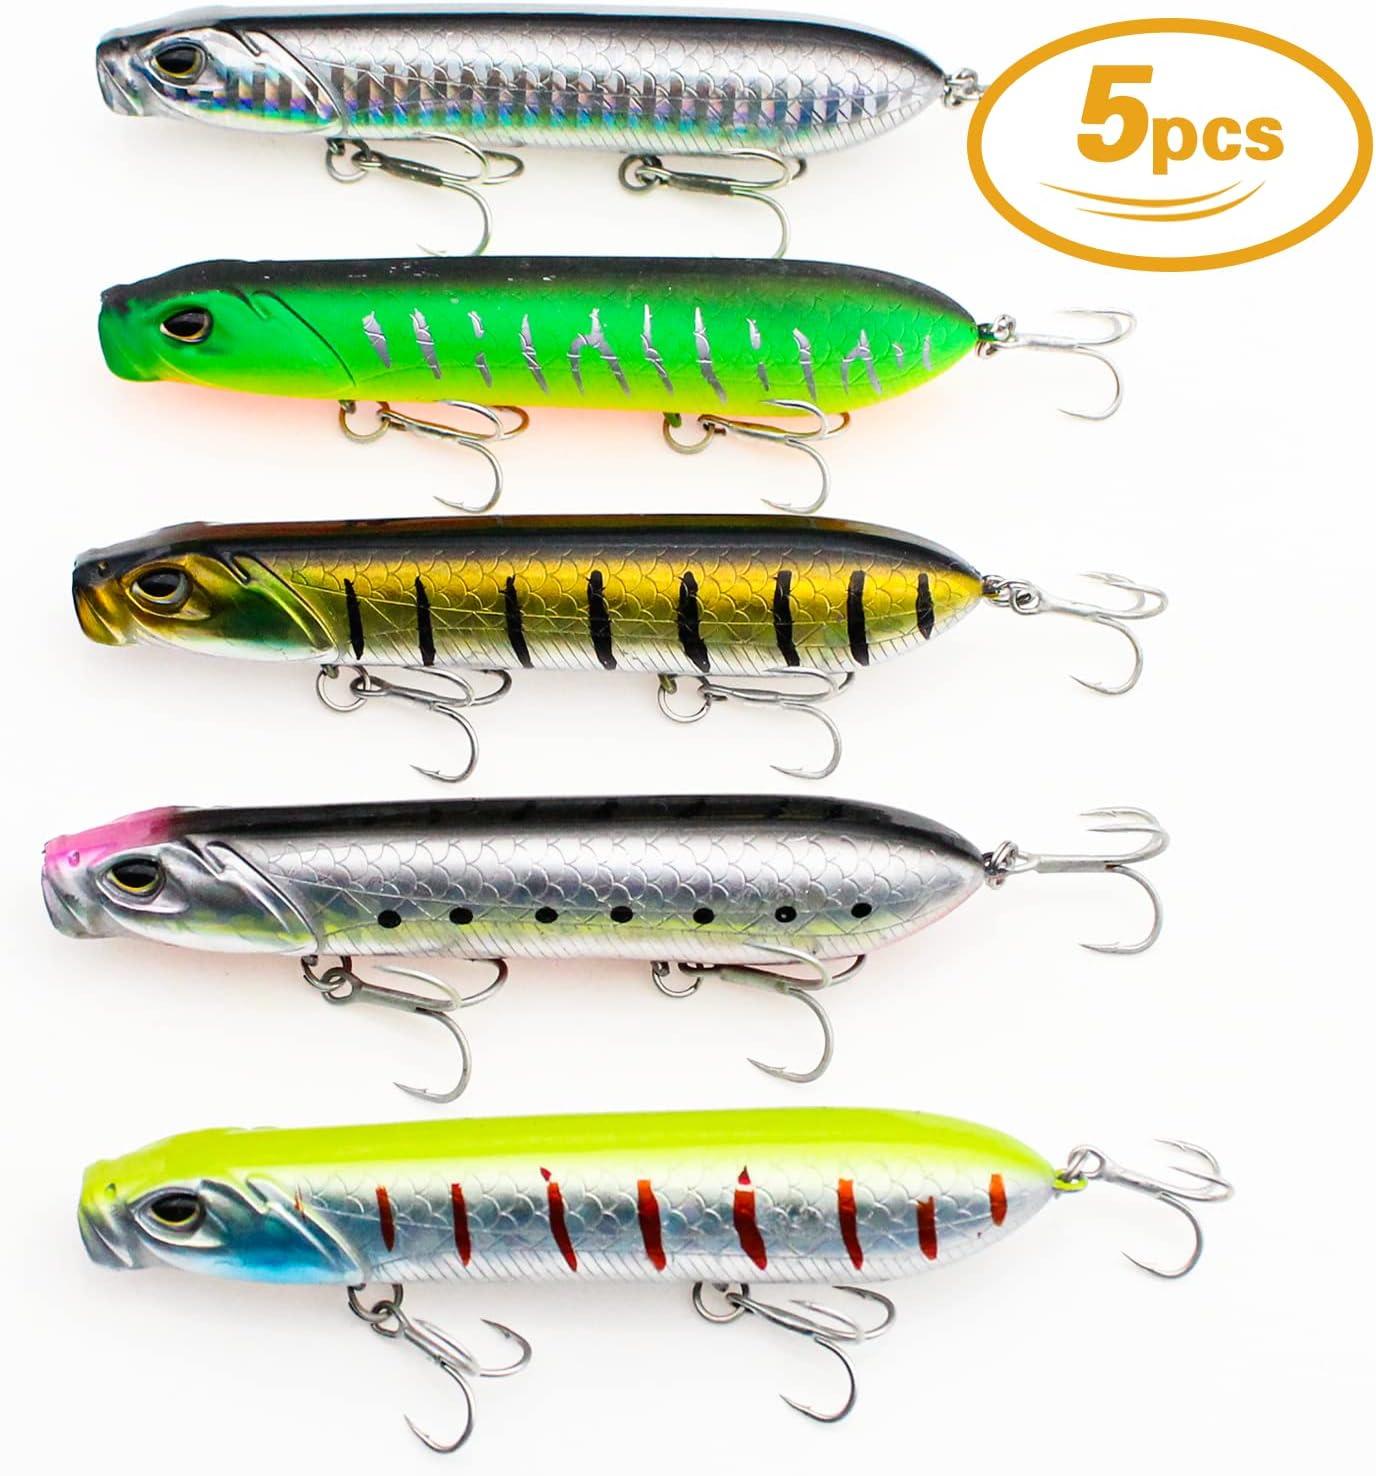 5Pcs Soft-Bionic-Fishing-Lure, bass-Lures, Trout-Lures, top-Water